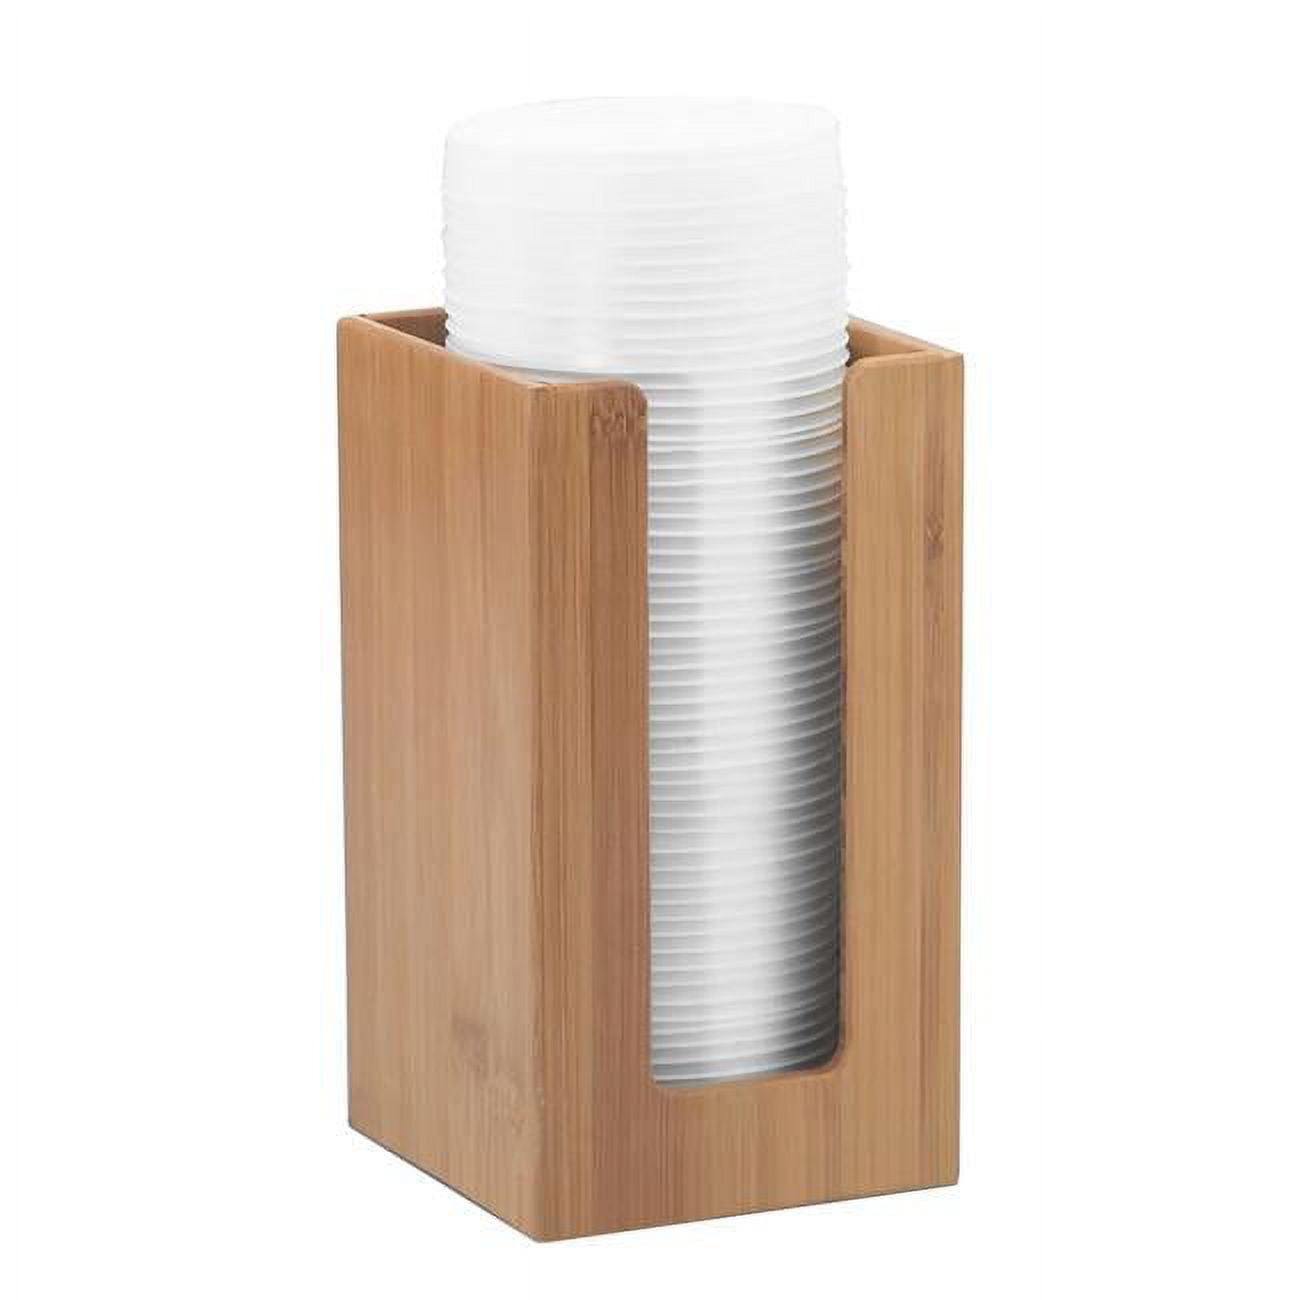 Picture of Cal Mil 298-60 Bamboo Lid Organizer - 4.5 x 4.5 x 8 in.